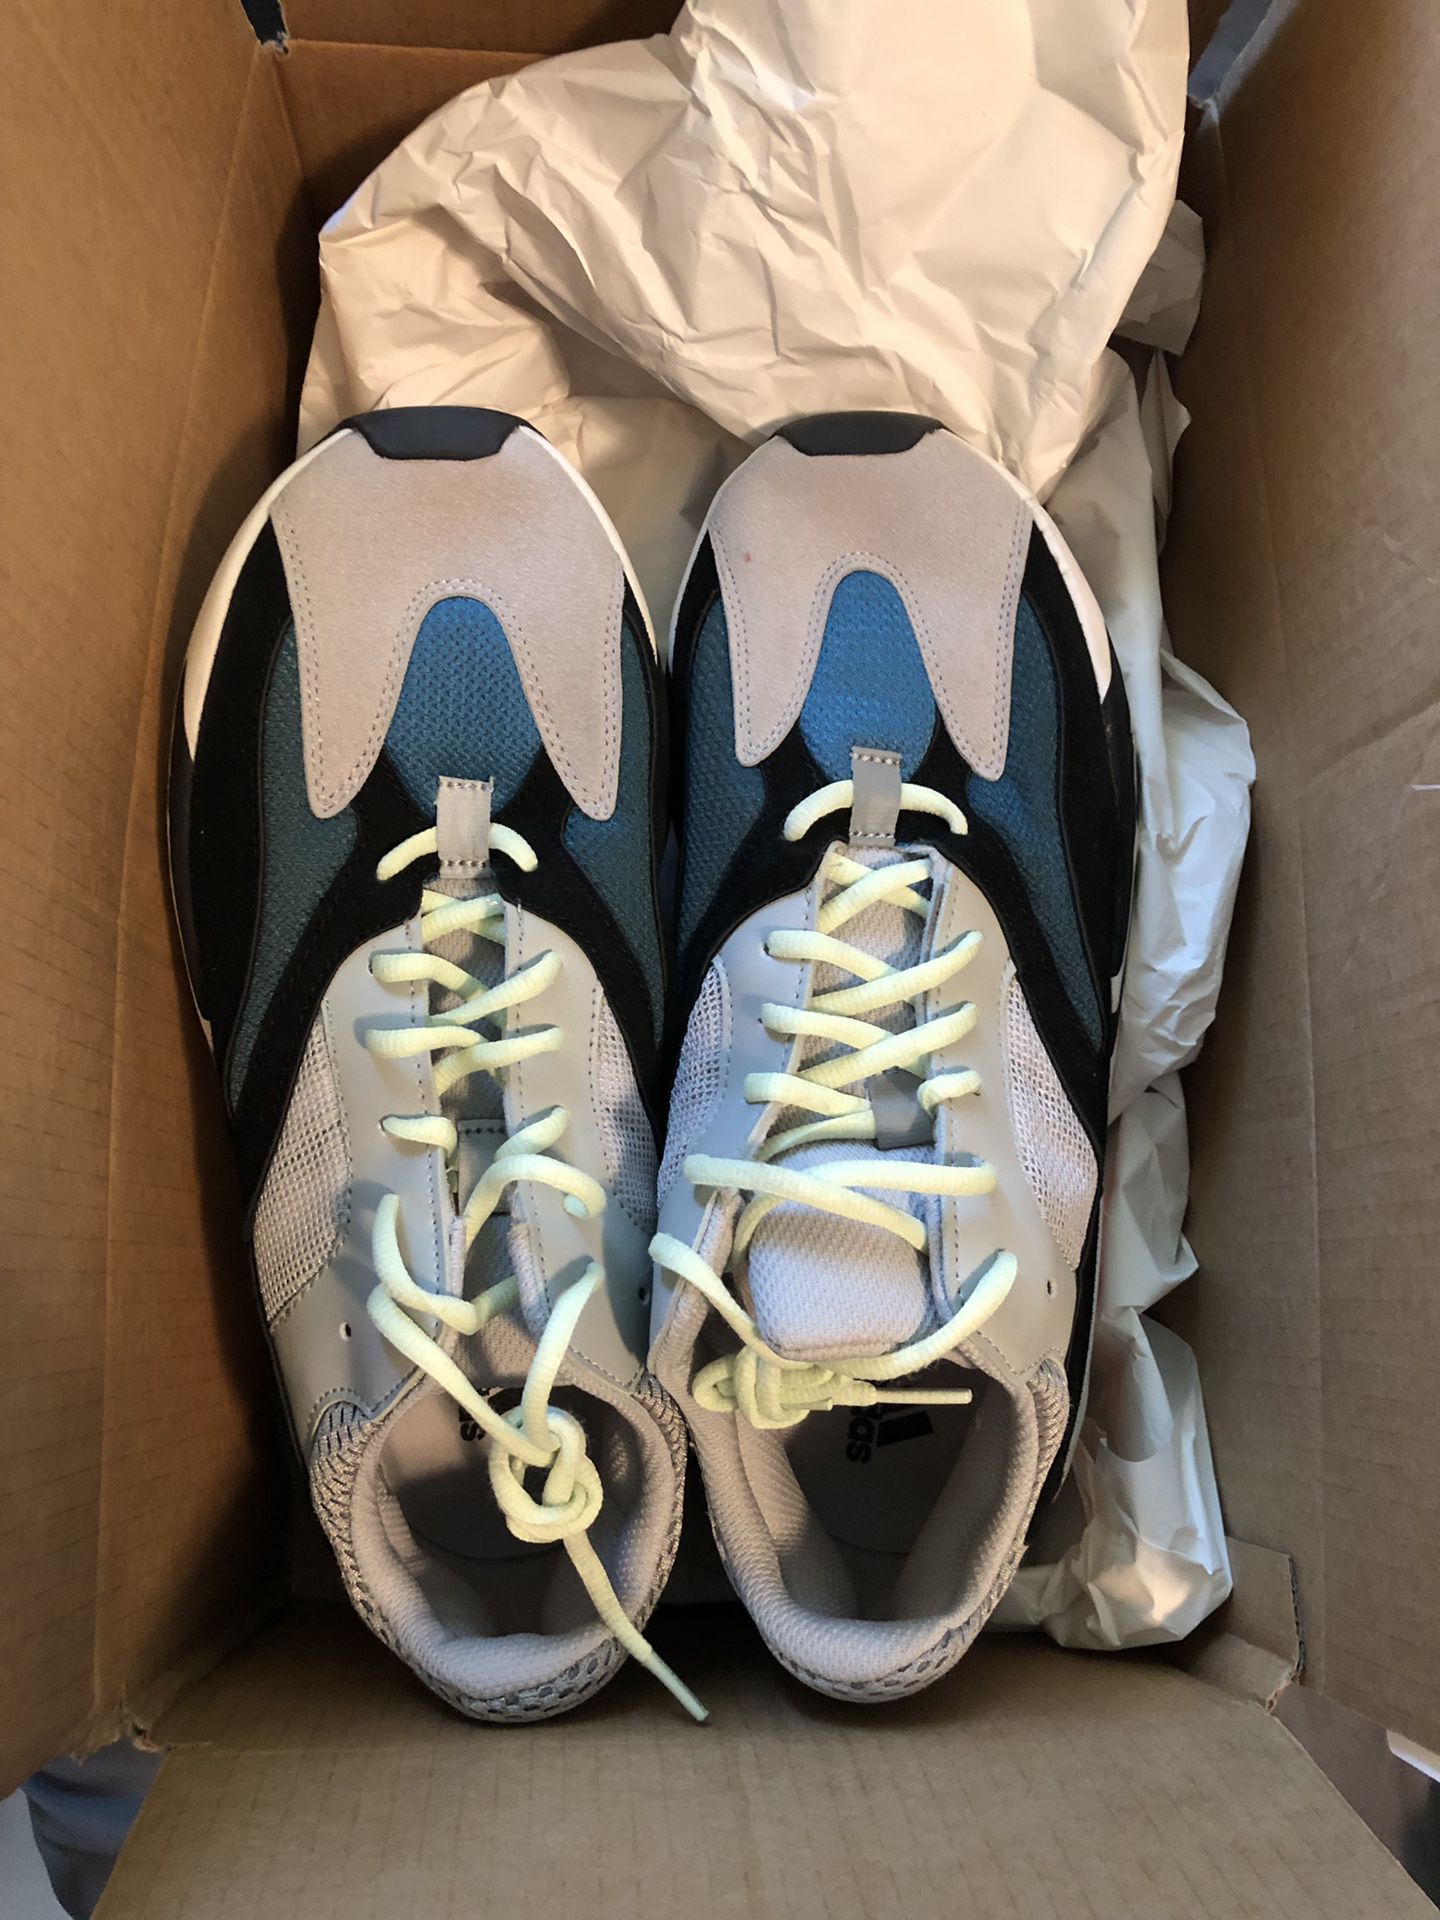 Adidas Mens Yeezy Boost 700 "Wave Runner size 11